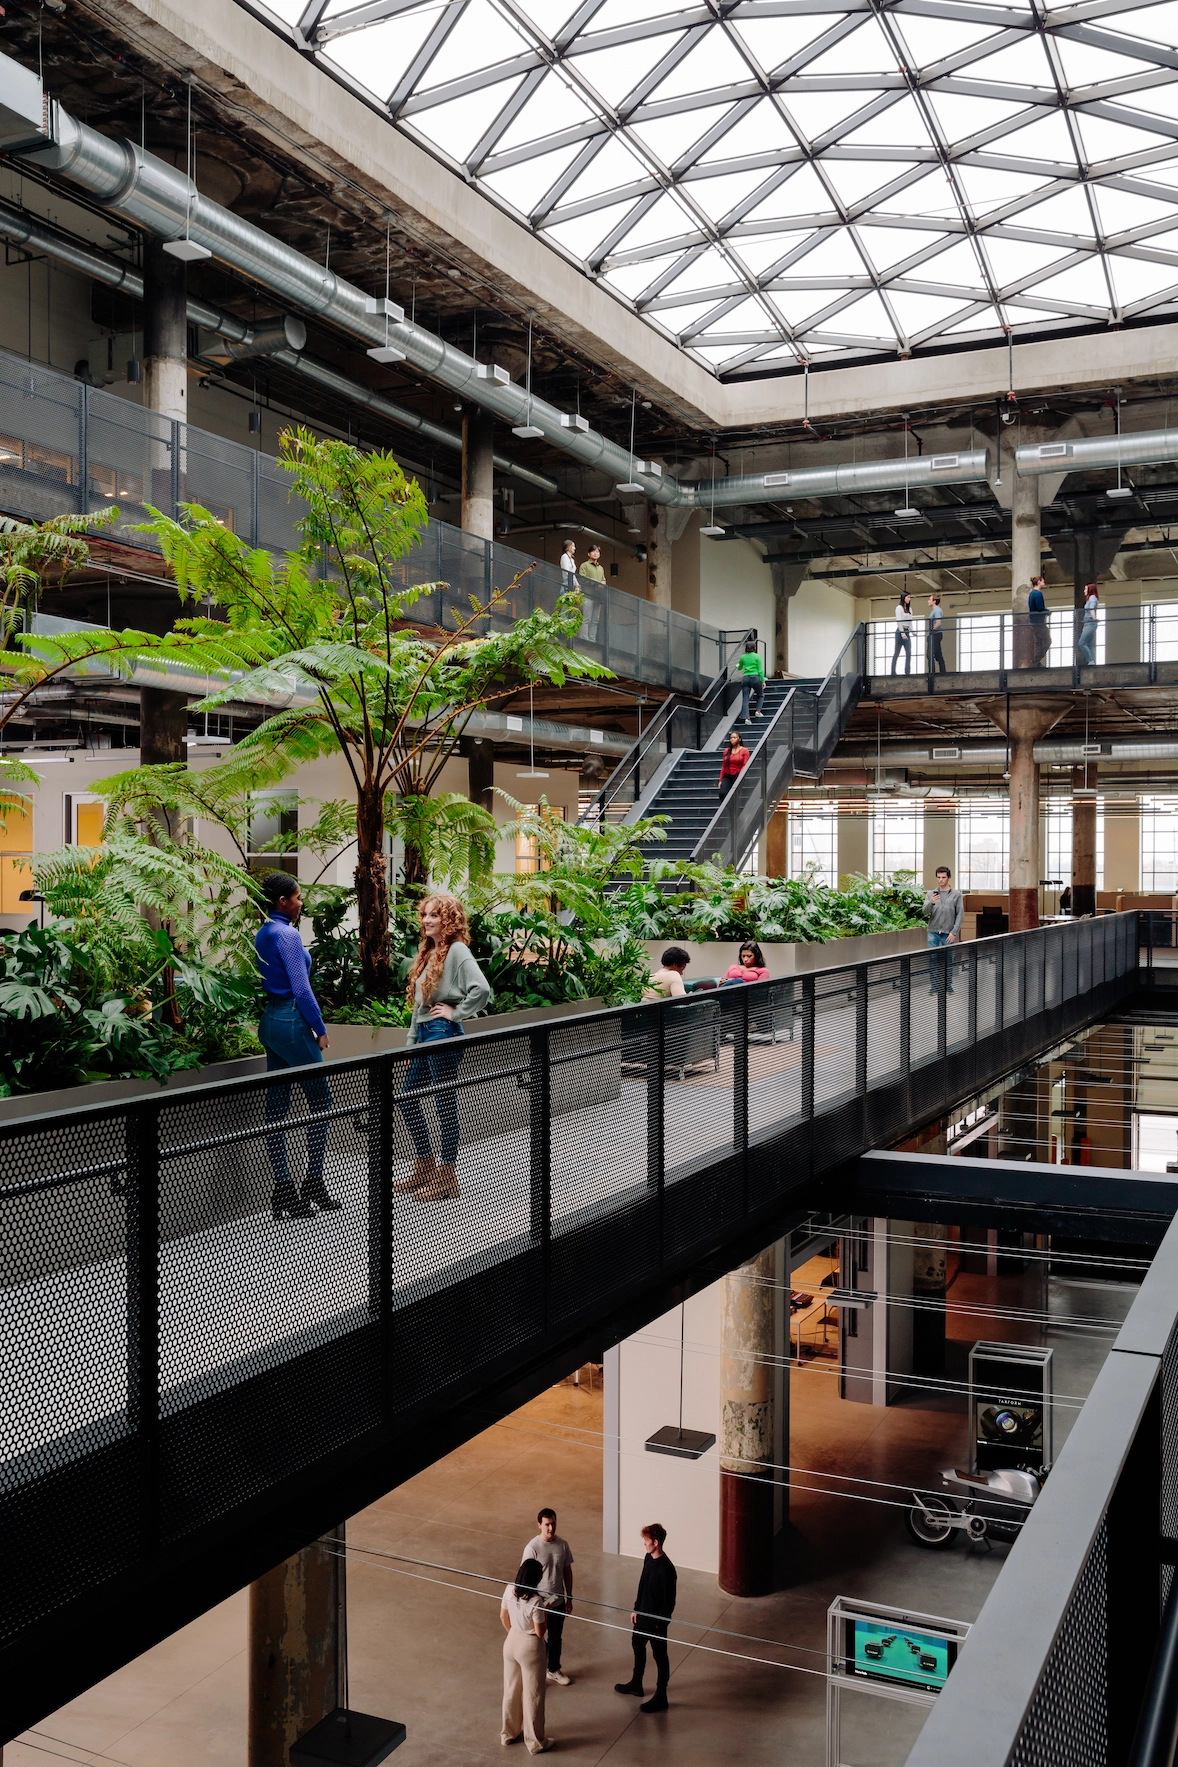 a daylit atrium in a large industrial space.